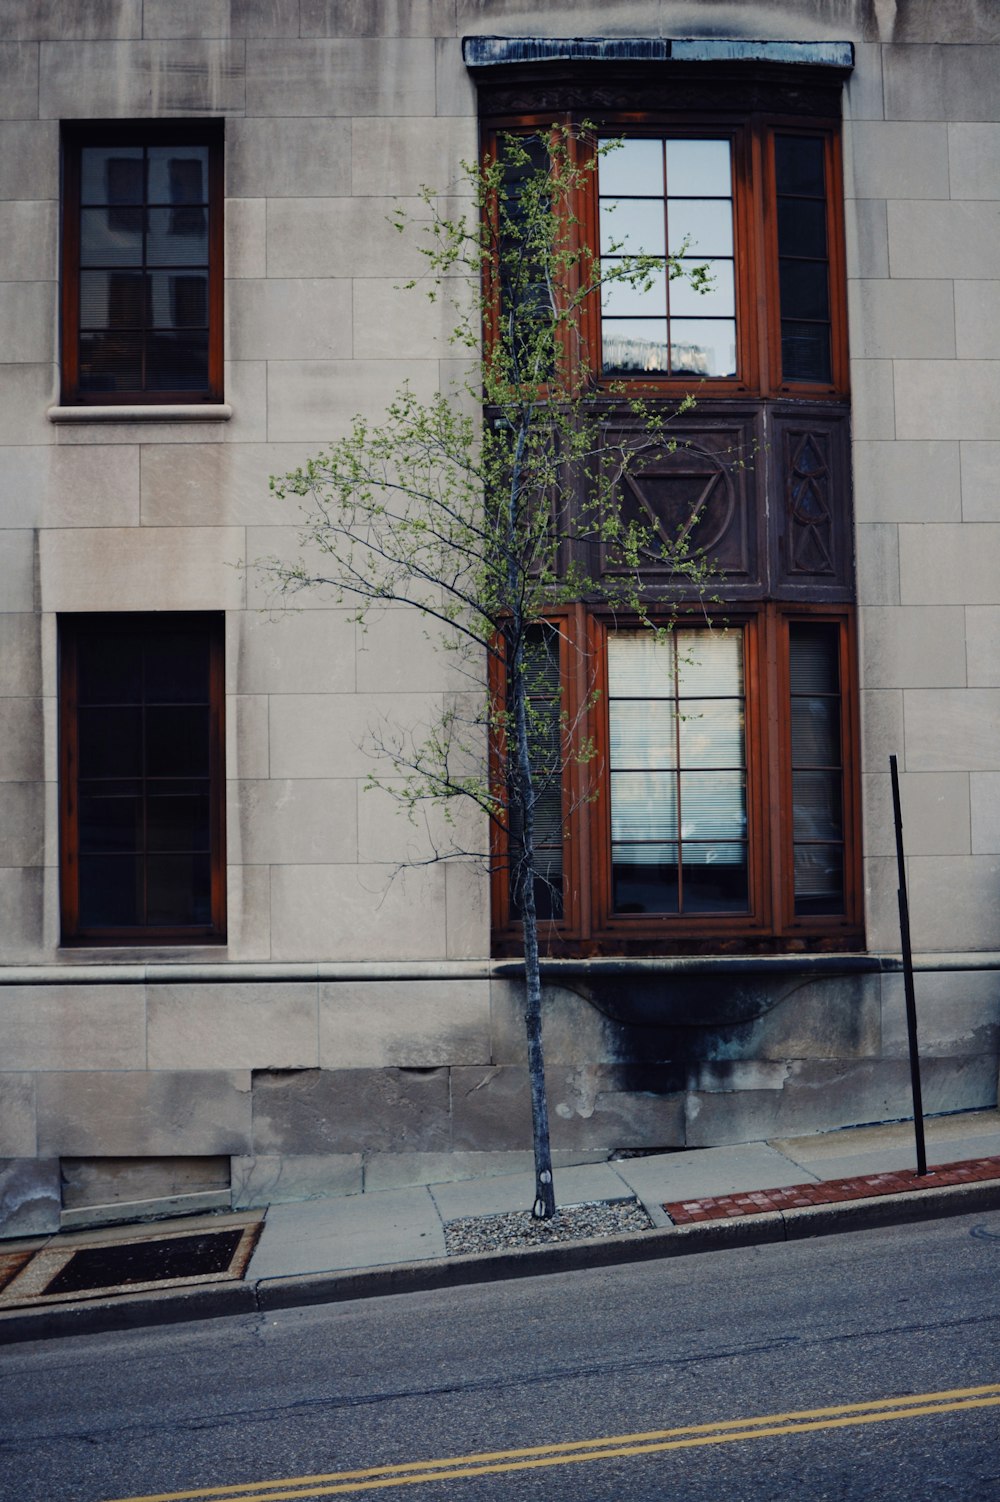 a tree in front of a building on a city street